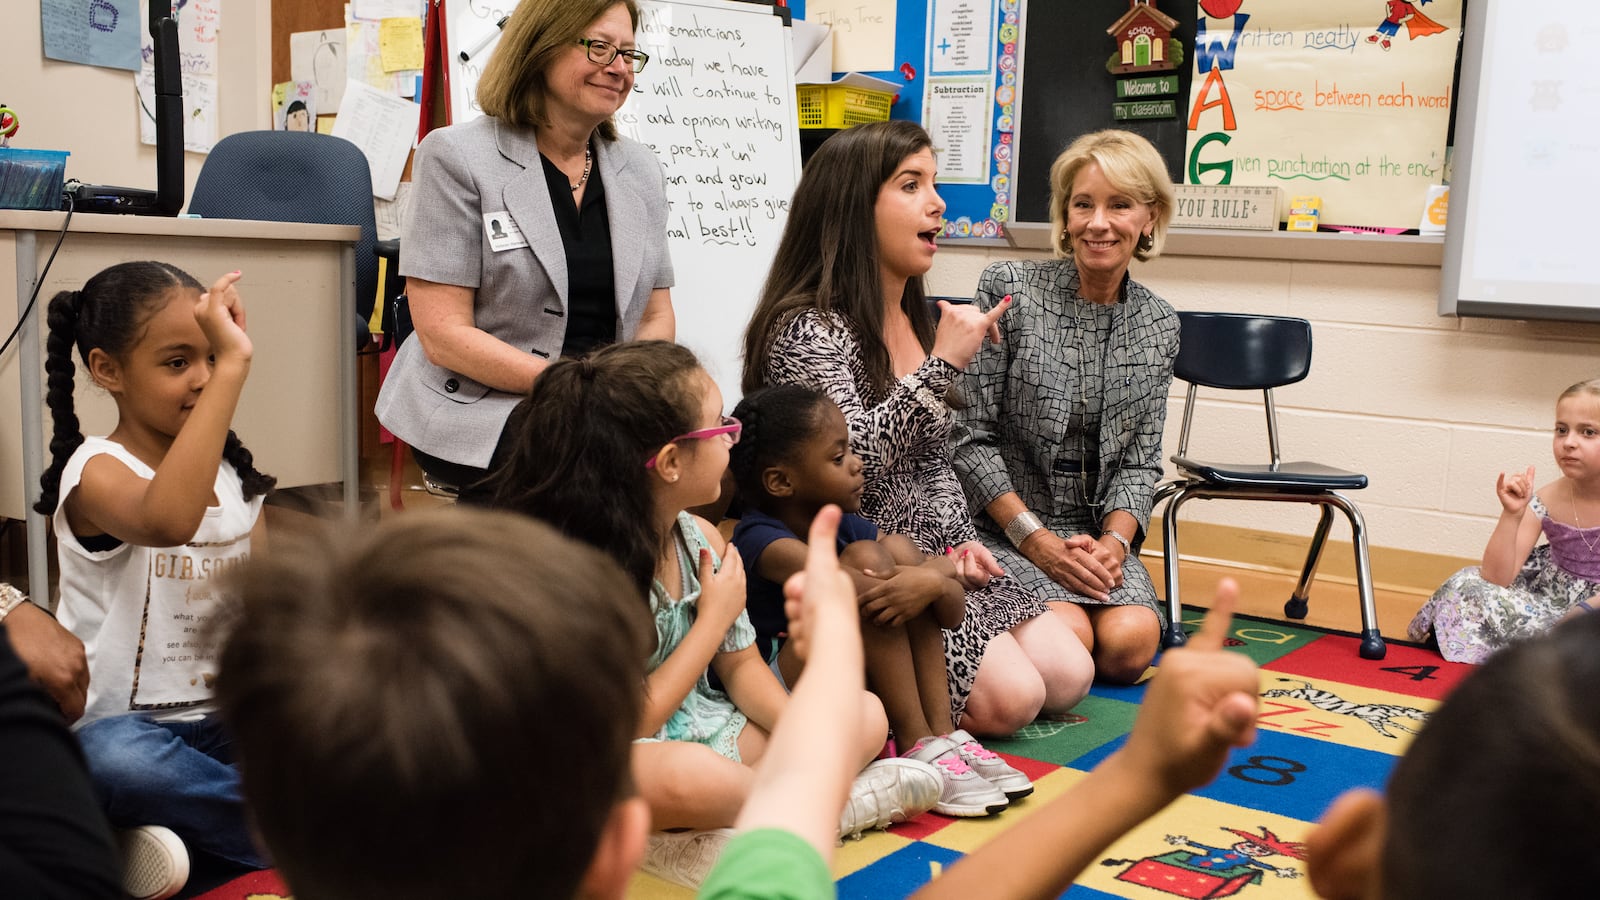 Education Secretary Betsy DeVos, right, sits on the floor during the morning meeting with teacher, Angel Snyder, center, and her first grade class in Hanover, New Hampshire in 2018. (photo by Sarah L. Voisin/The Washington Post via Getty Images)